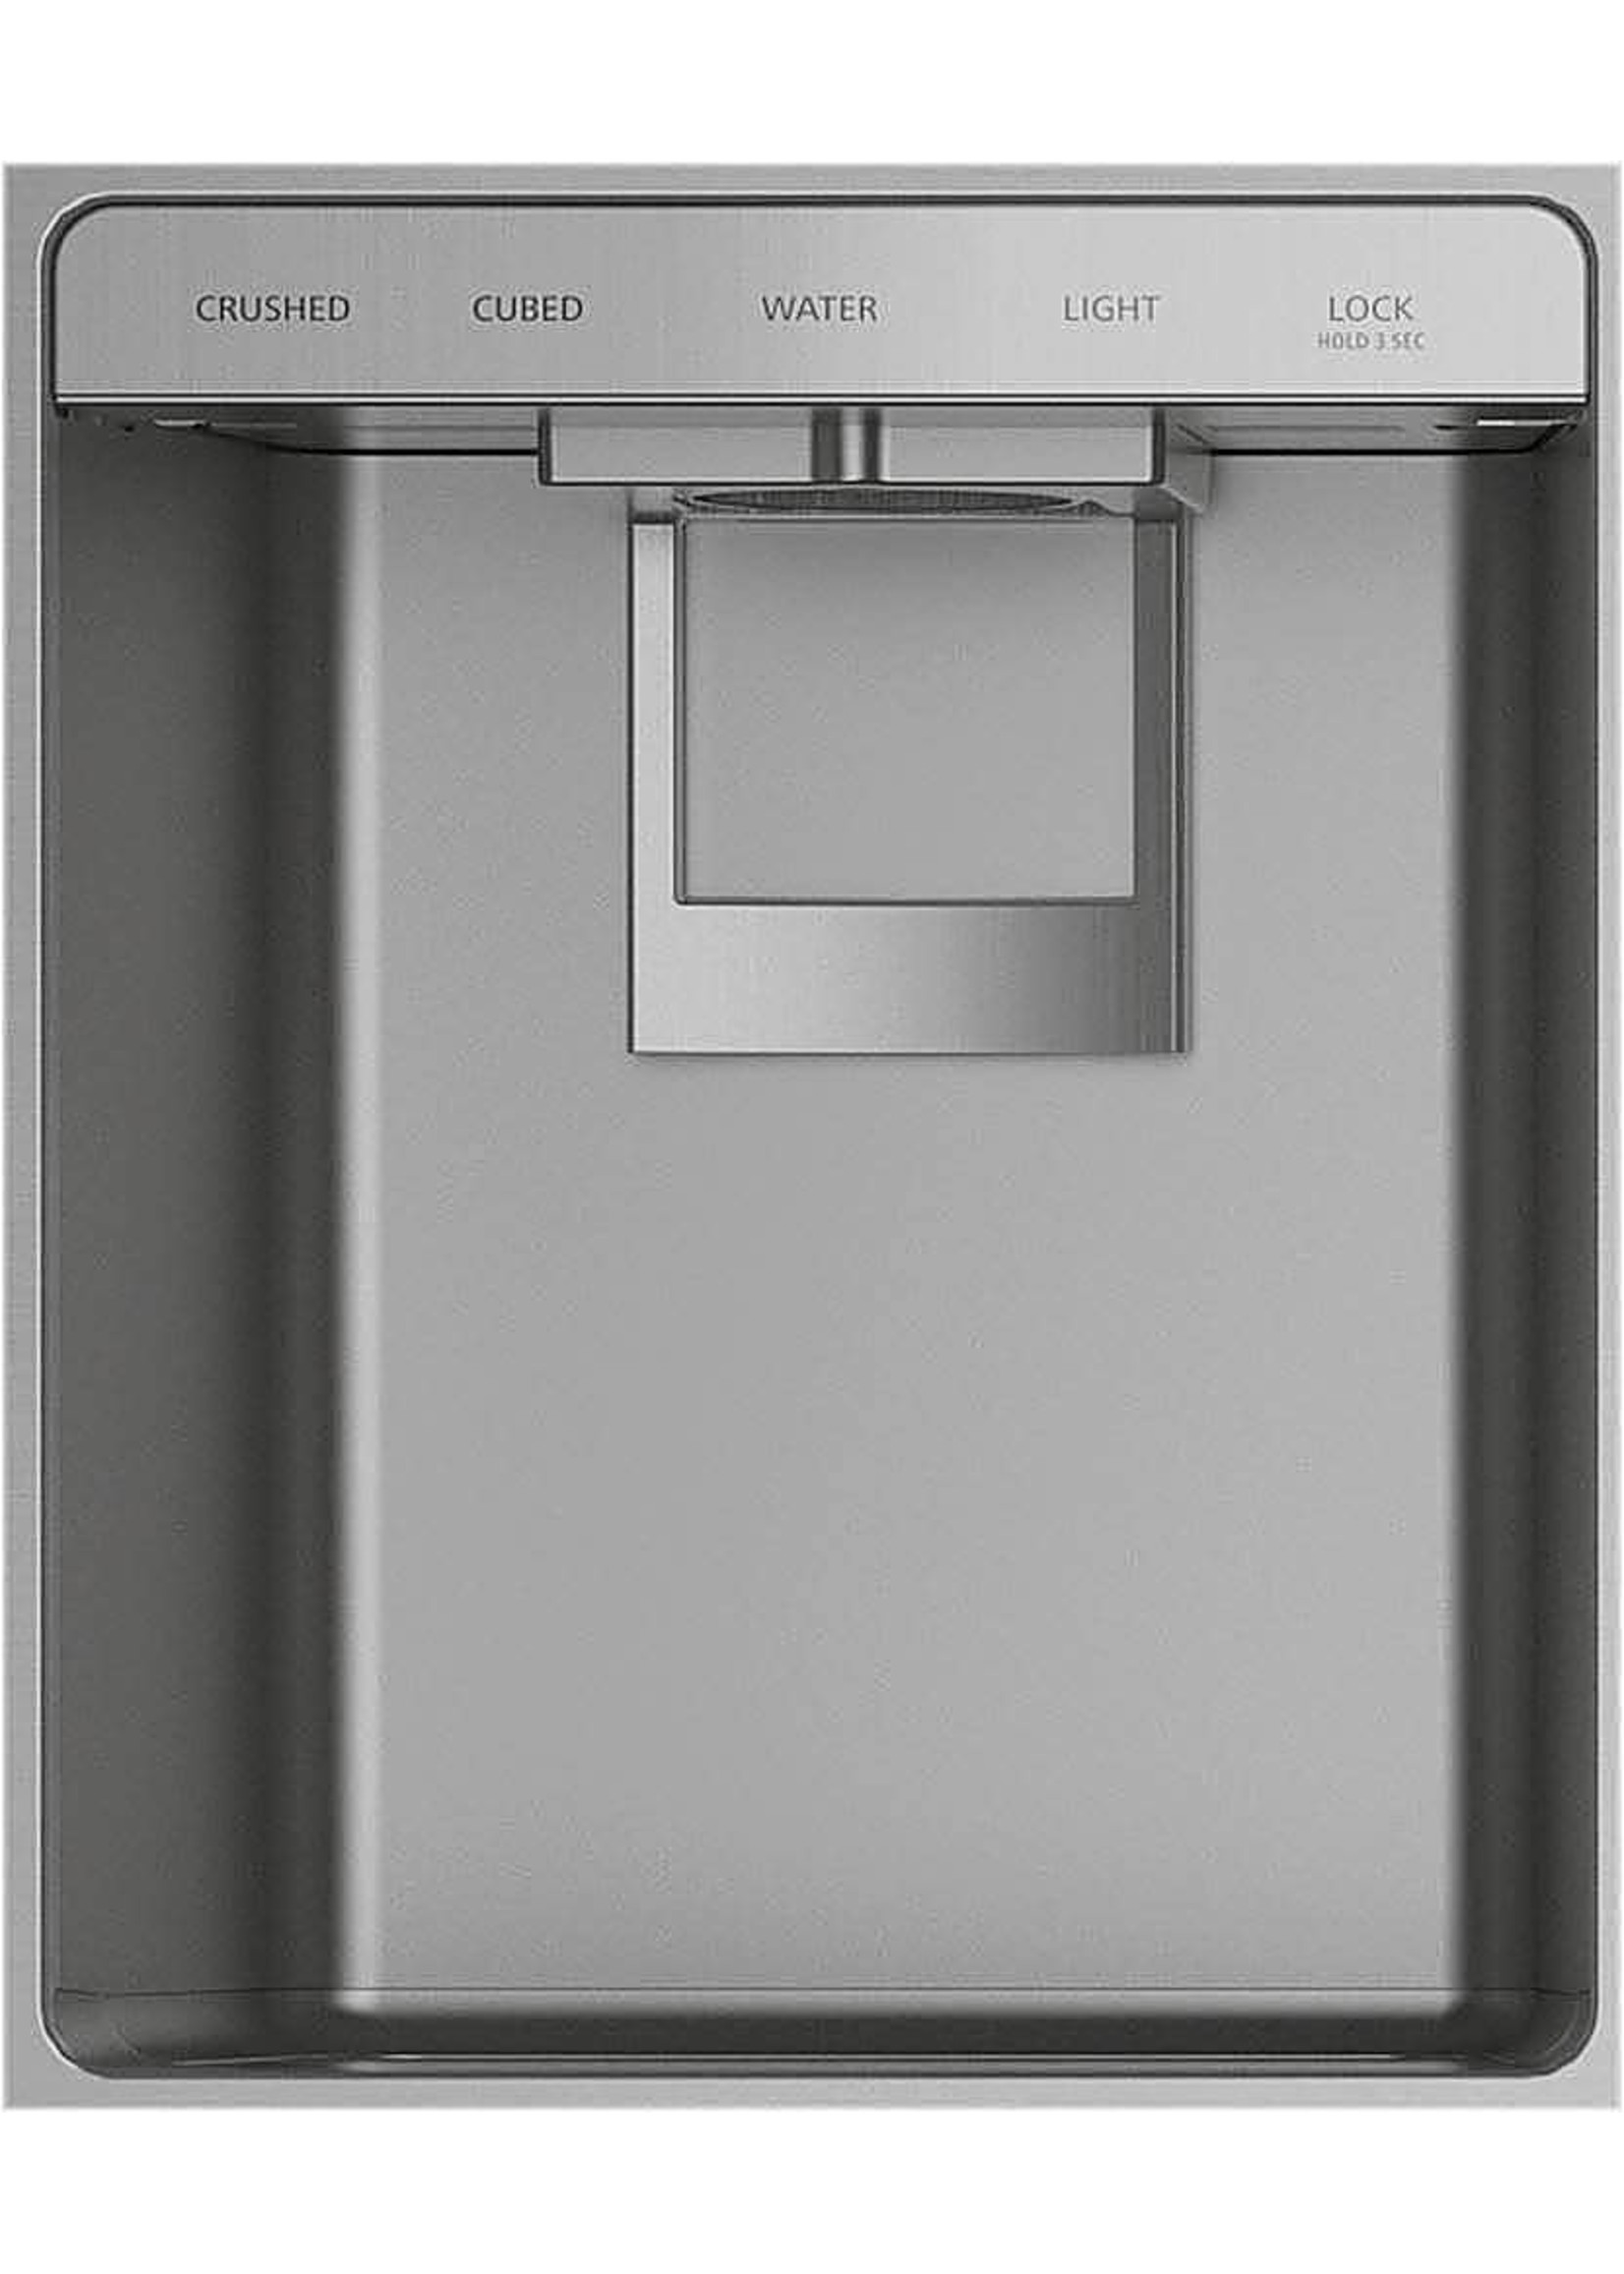 Monogram - 48 INCH 28.8 Cu. Ft. Side-by-Side Built-In Refrigerator with Dispenser - Stainless steel